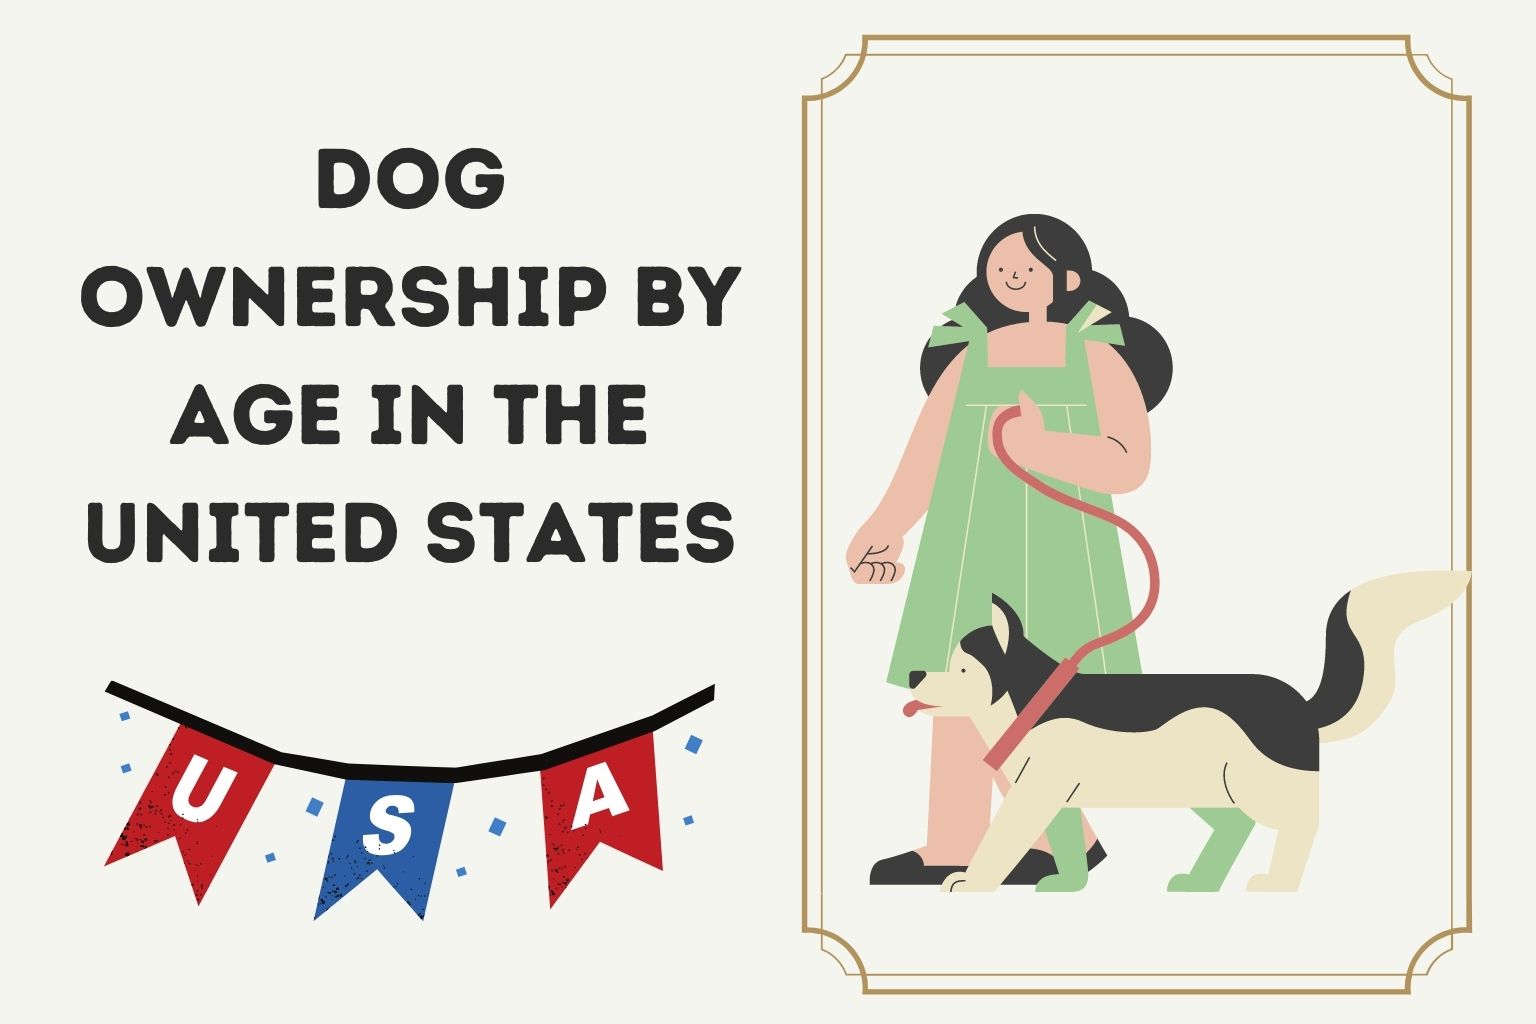 Dog Ownership by Age in the United States